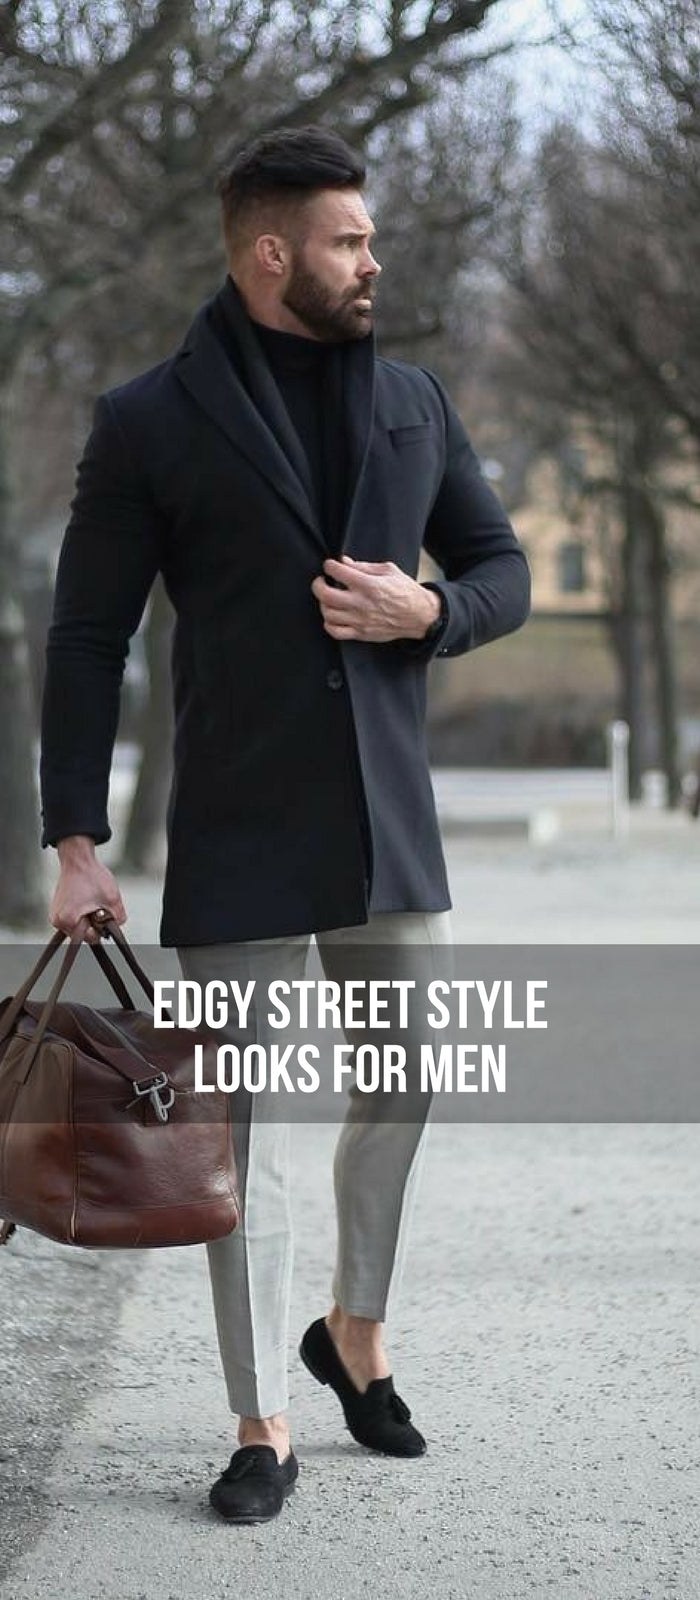 16 Edgy Street Style Looks To Help You Dress Sharp Lifestyle By Ps